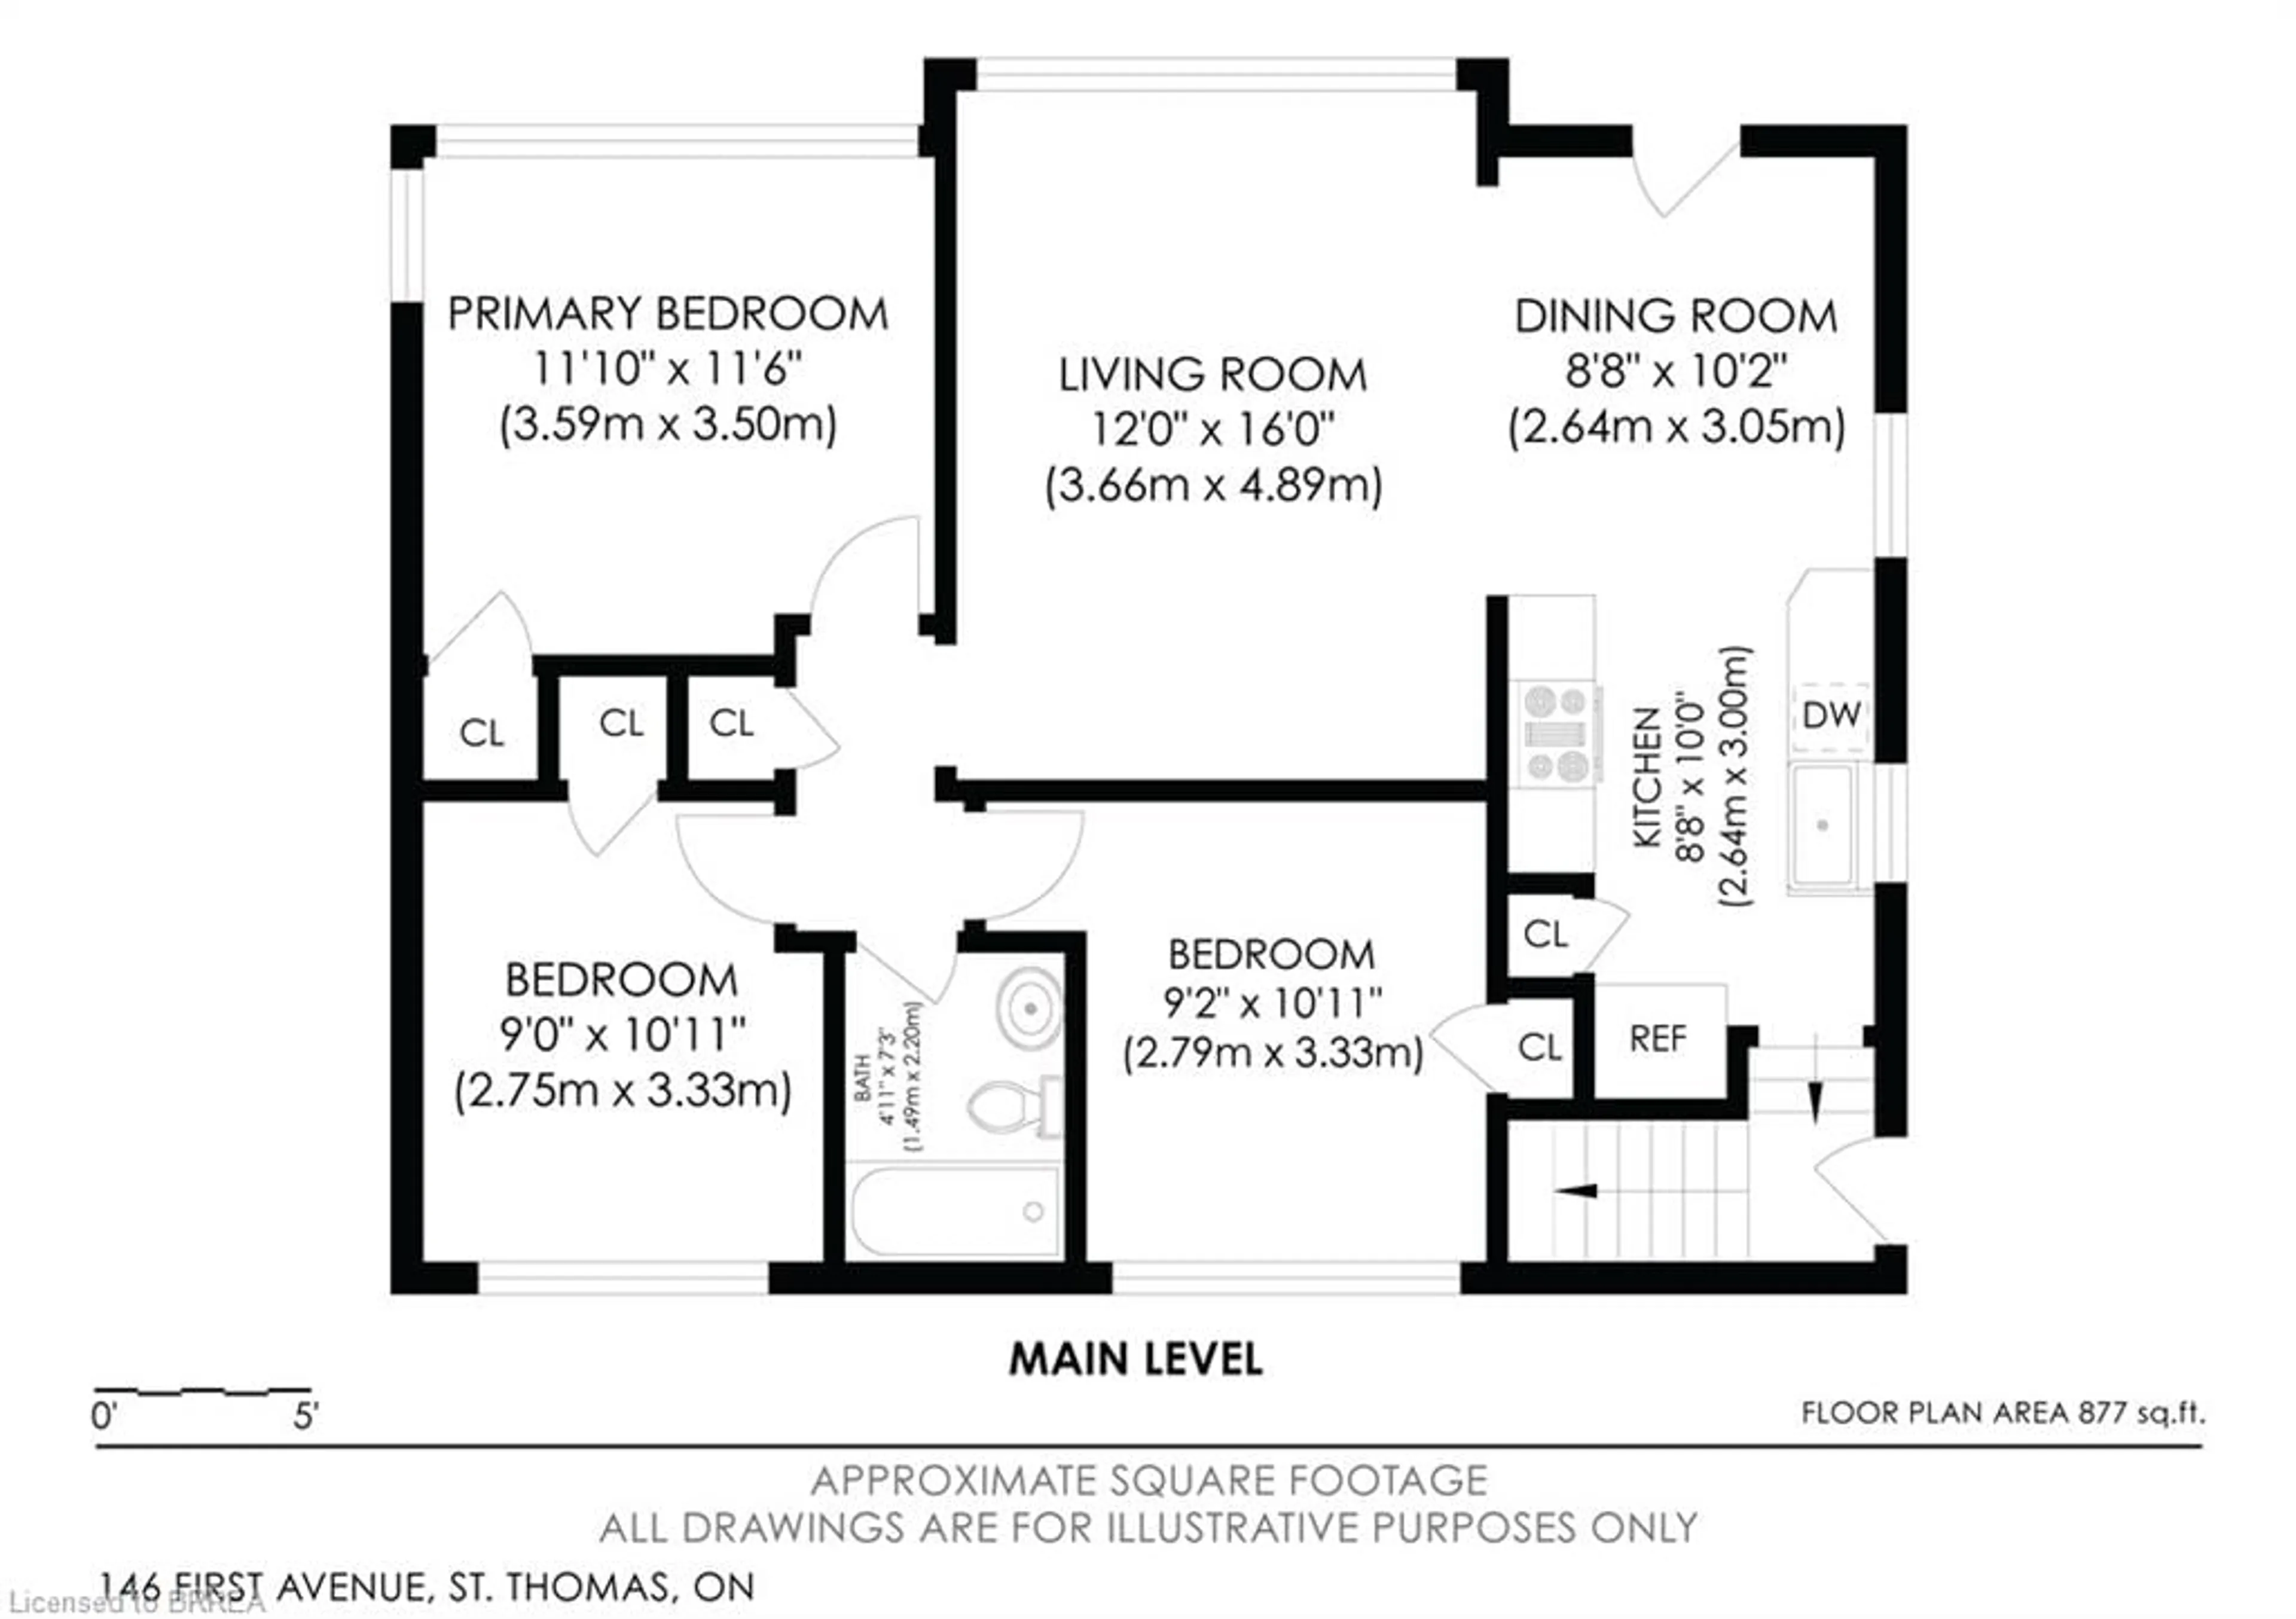 Floor plan for 146 First Ave, St. Thomas Ontario N5R 4P3